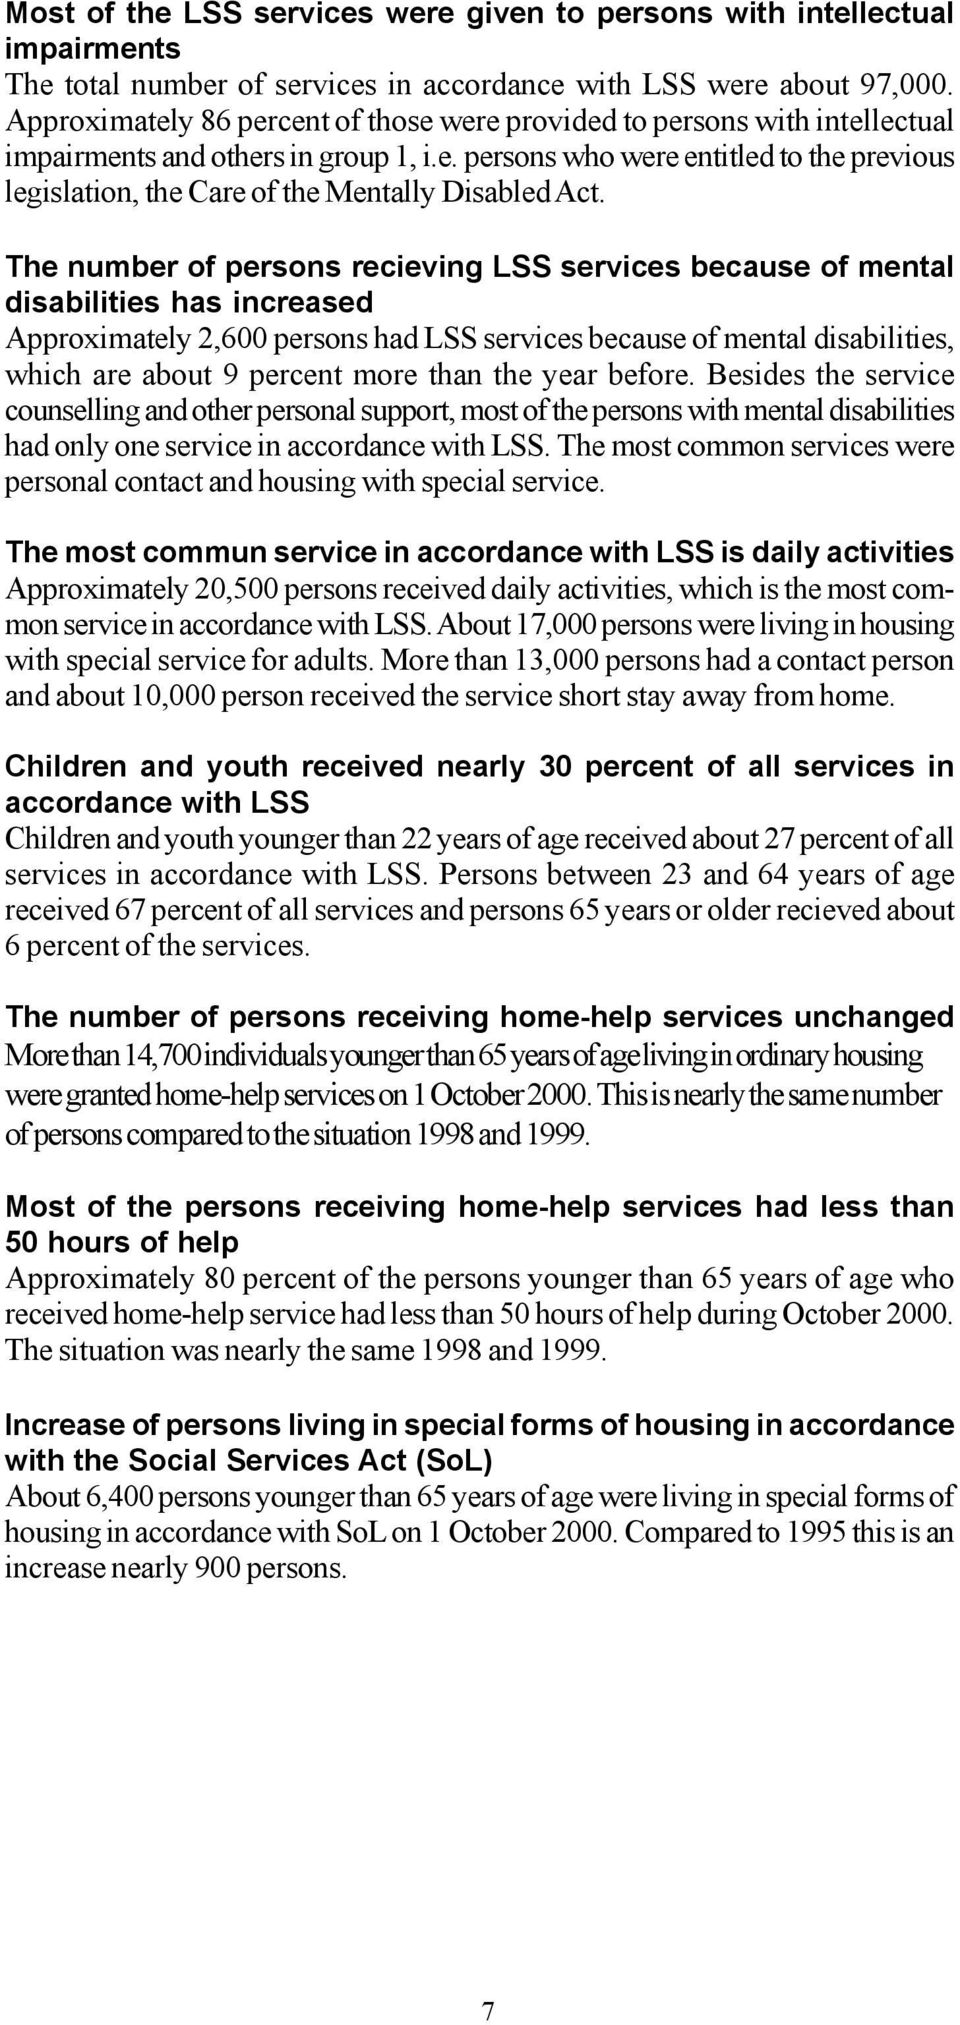 The number of persons recieving LSS services because of mental disabilities has increased Approximately 2,600 persons had LSS services because of mental disabilities, which are about 9 percent more